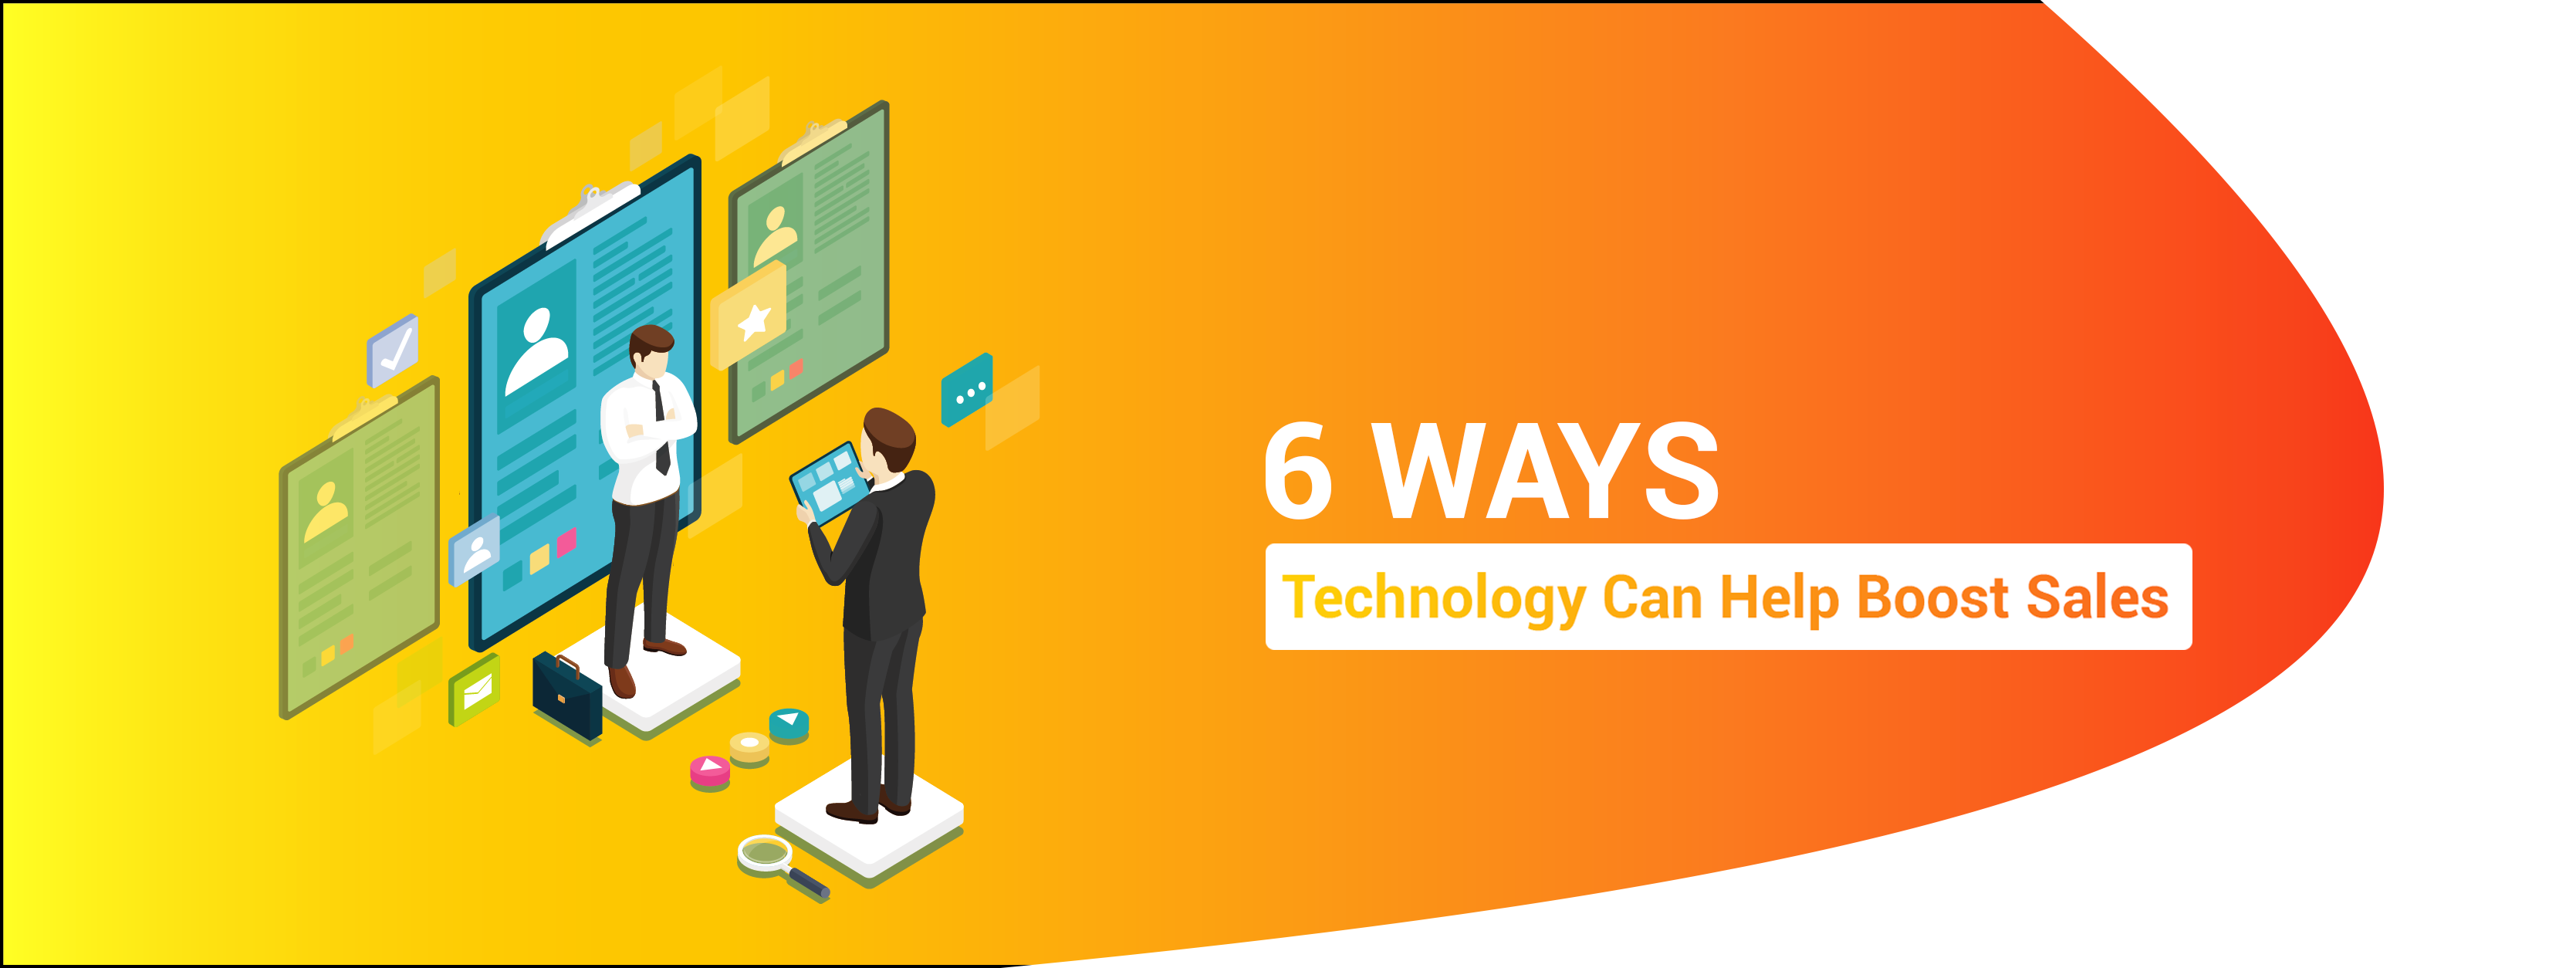 6 ways technology can help boost sales